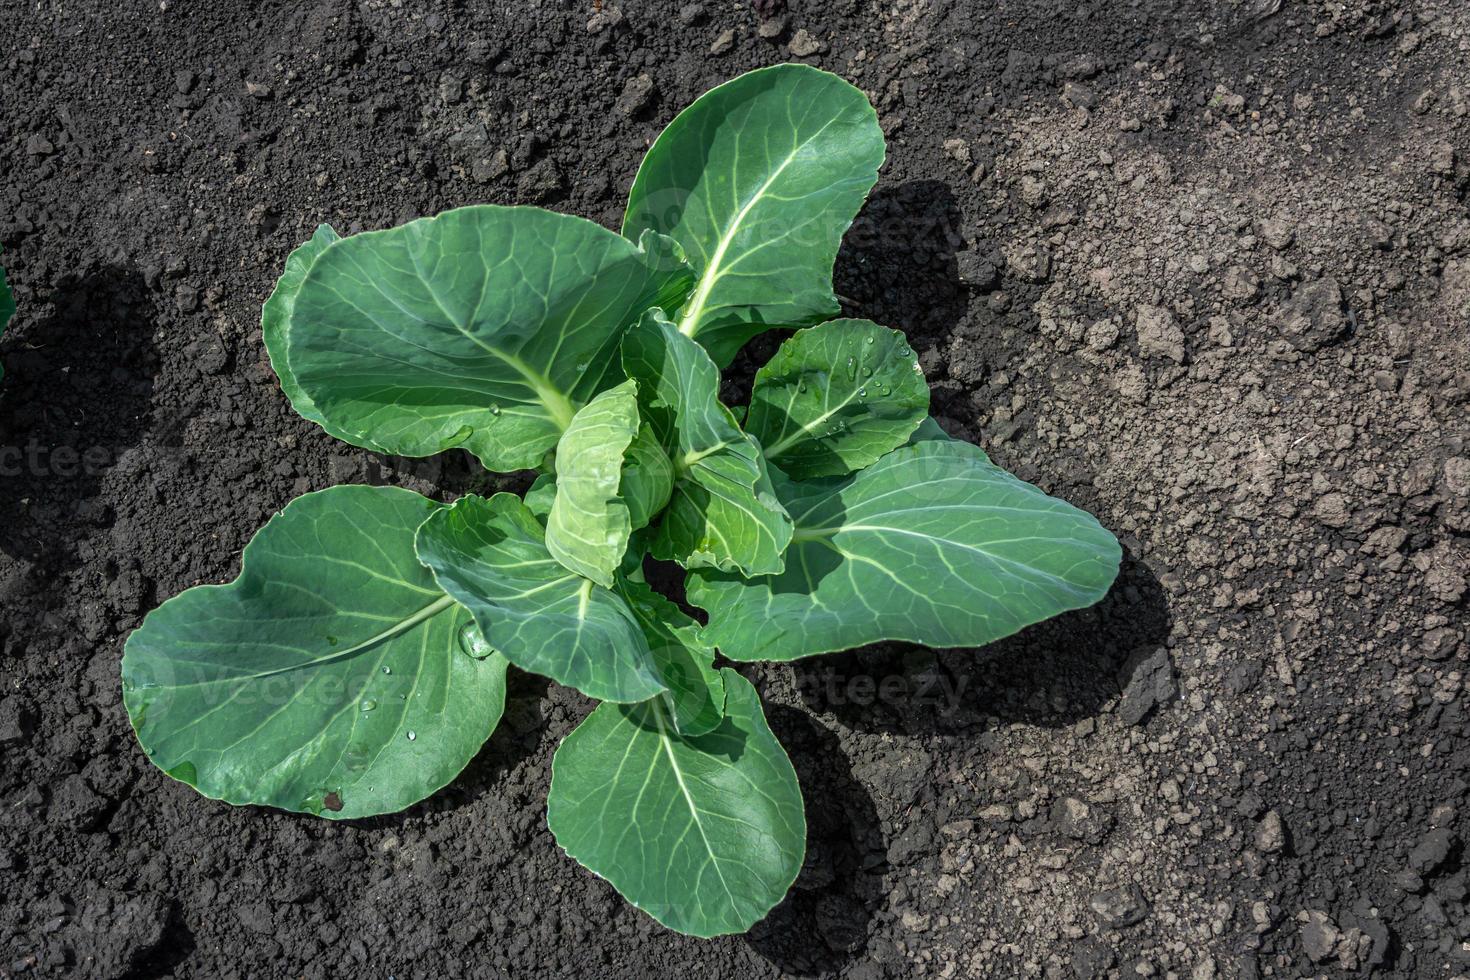 Young cabbage with large green leaves growing in the soil of the field. photo